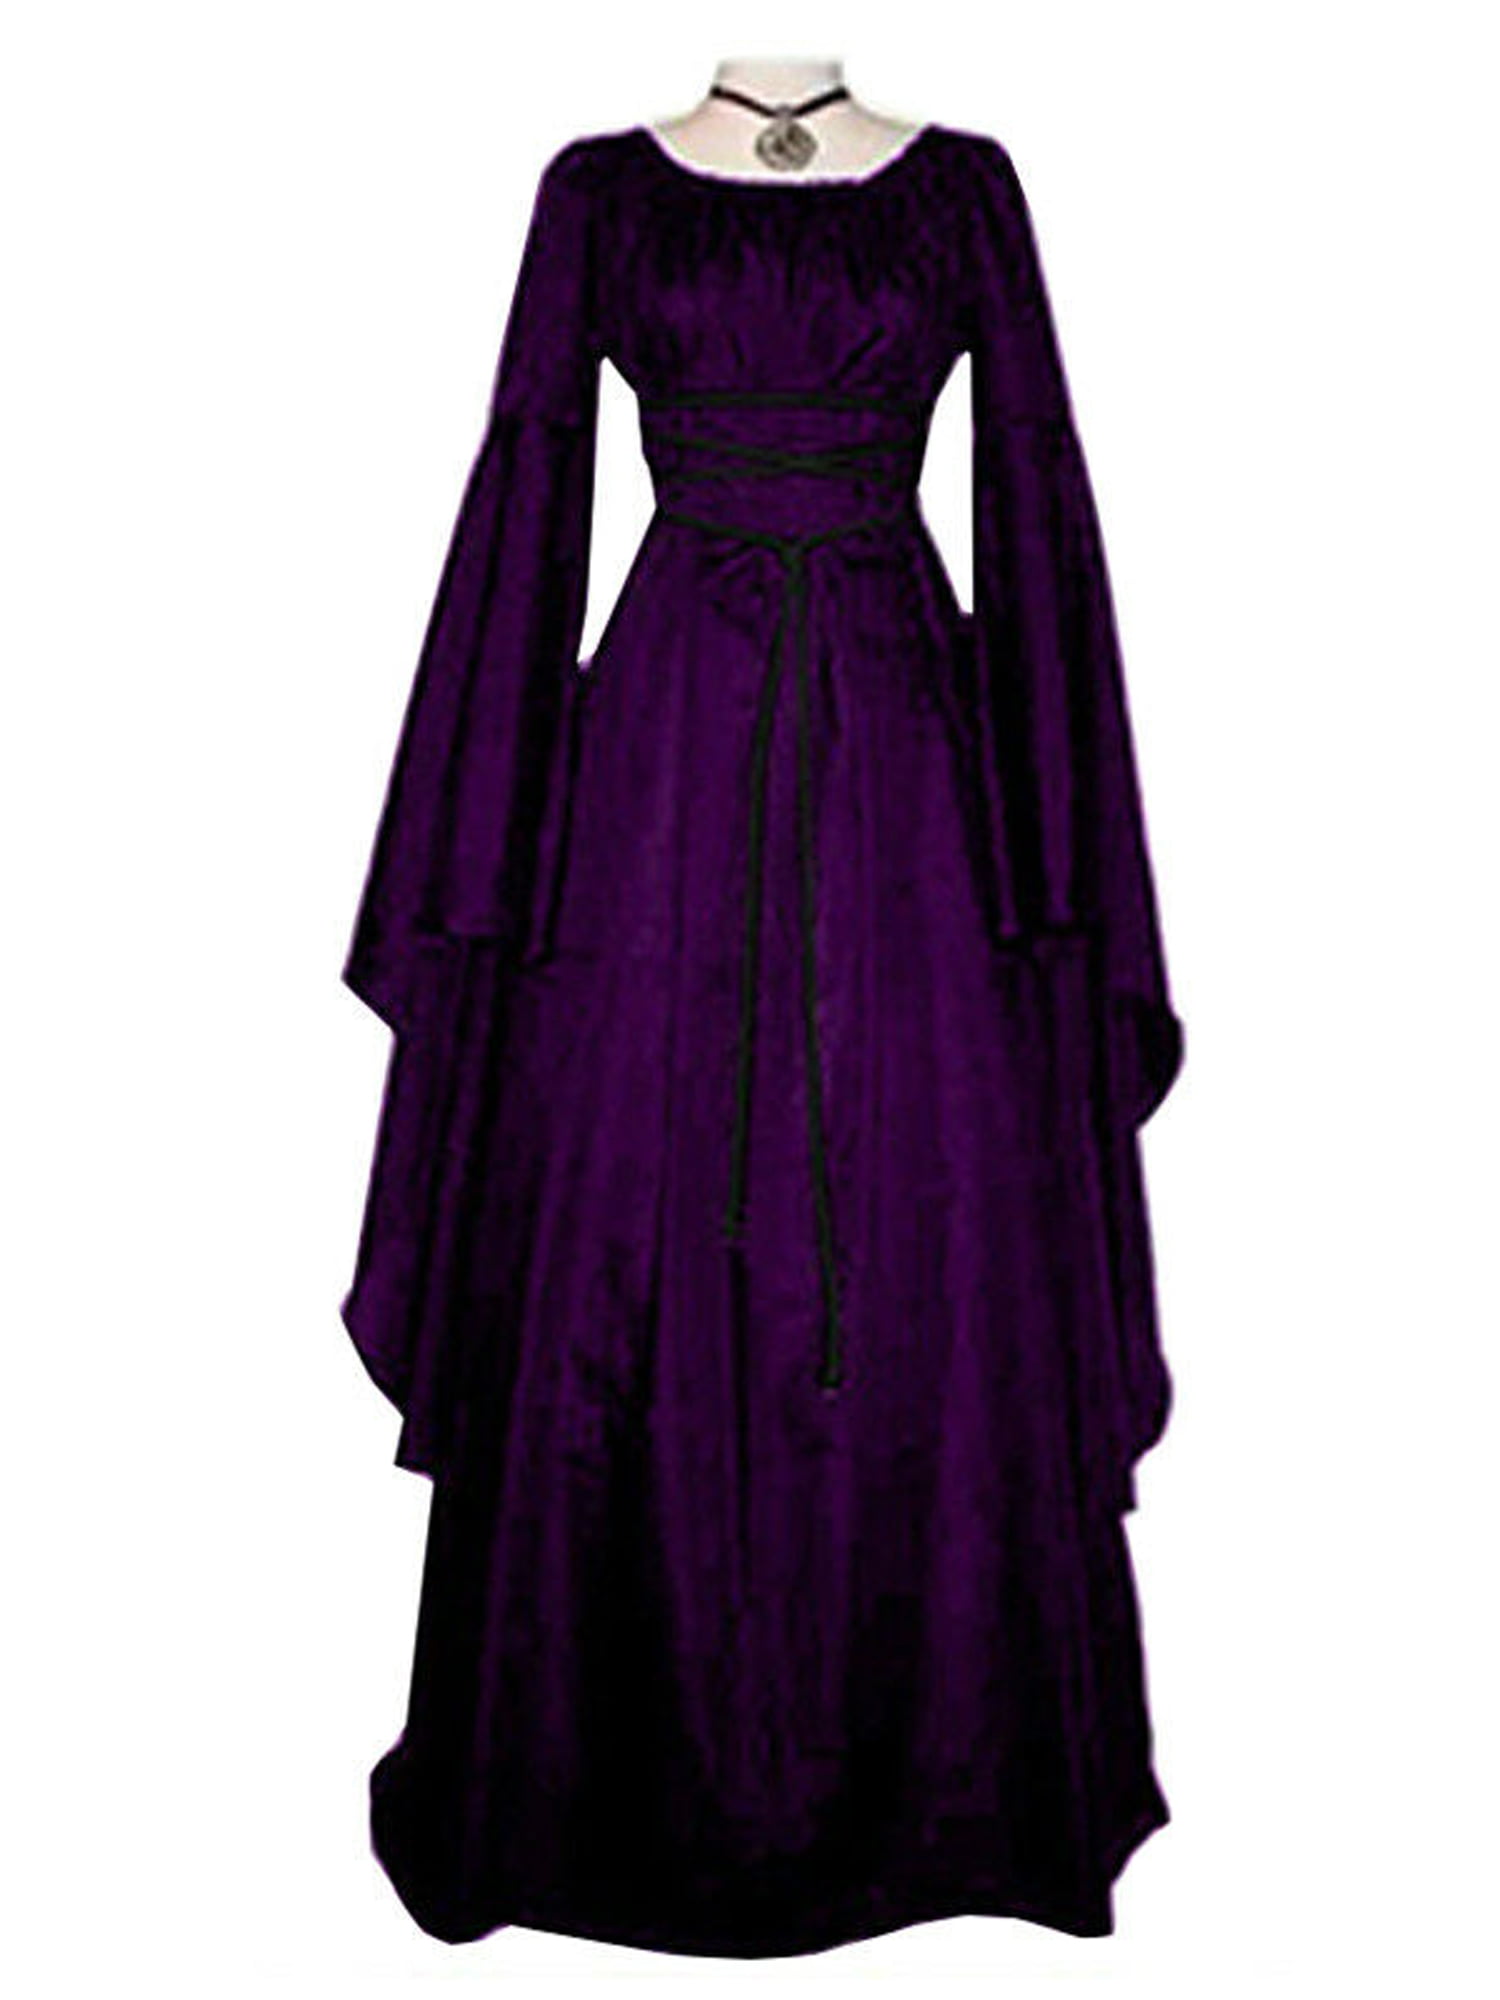 Shakub Womens Halloween Renaissance Witch Gothic Cosplay Maxi Dress Medieval Party Vintage Ball